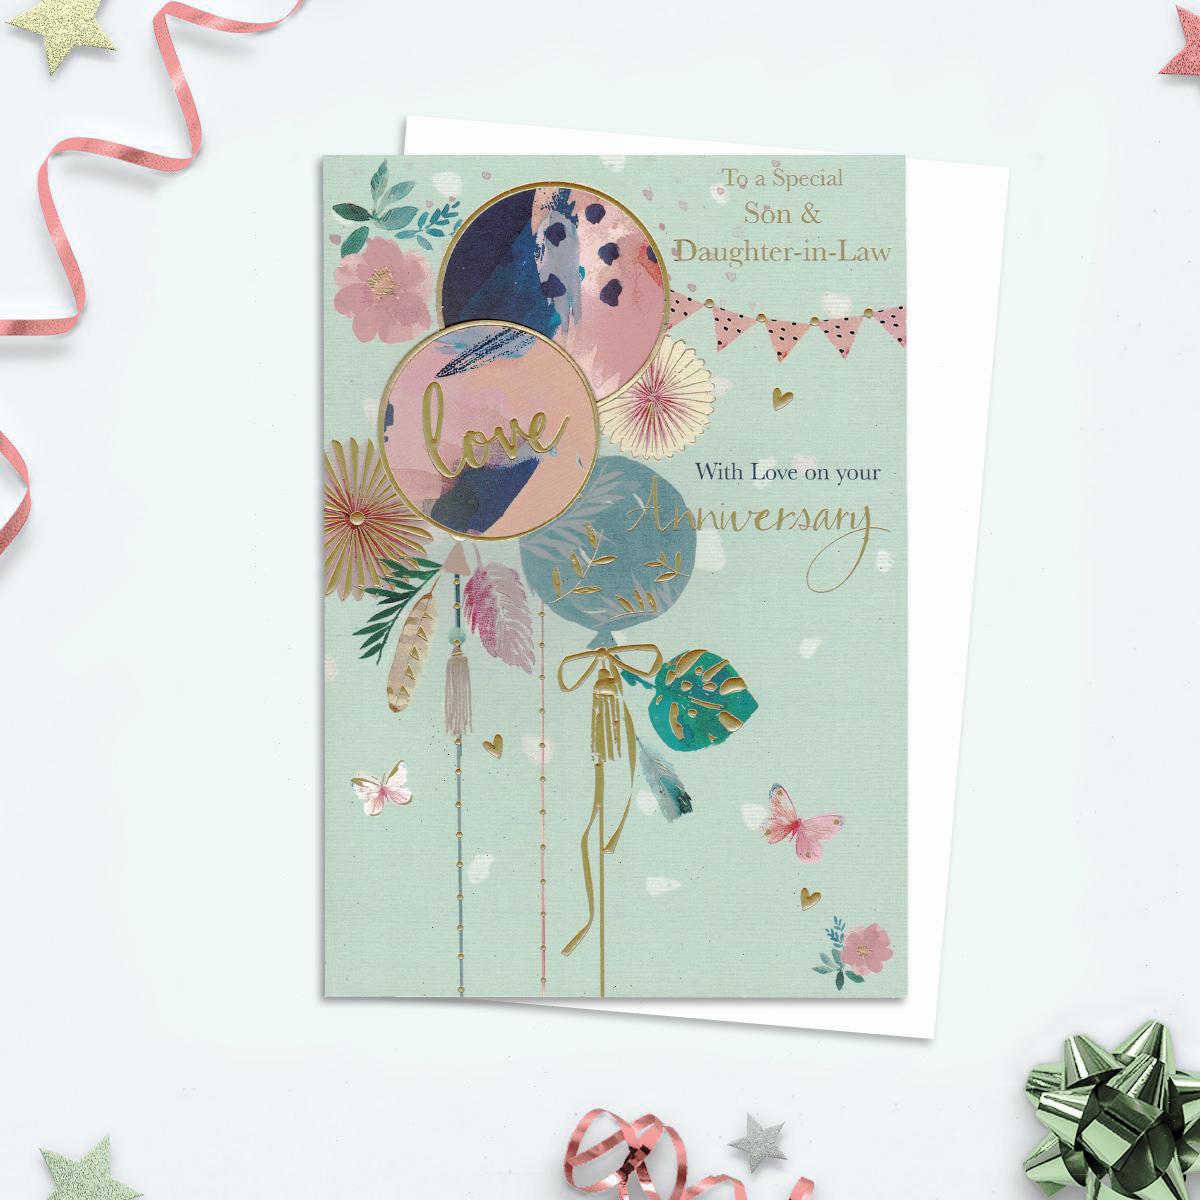 To A Special Son And Daughter In Law With Love On Your Anniversary Card . Depicting Pastel Pinks And Green Colours With Gold Foil Accents. Balloons, Bunting, Flowers And Butterflies All Add To The Charm. Decoupage Element to The Front And Complete With A White Envelope